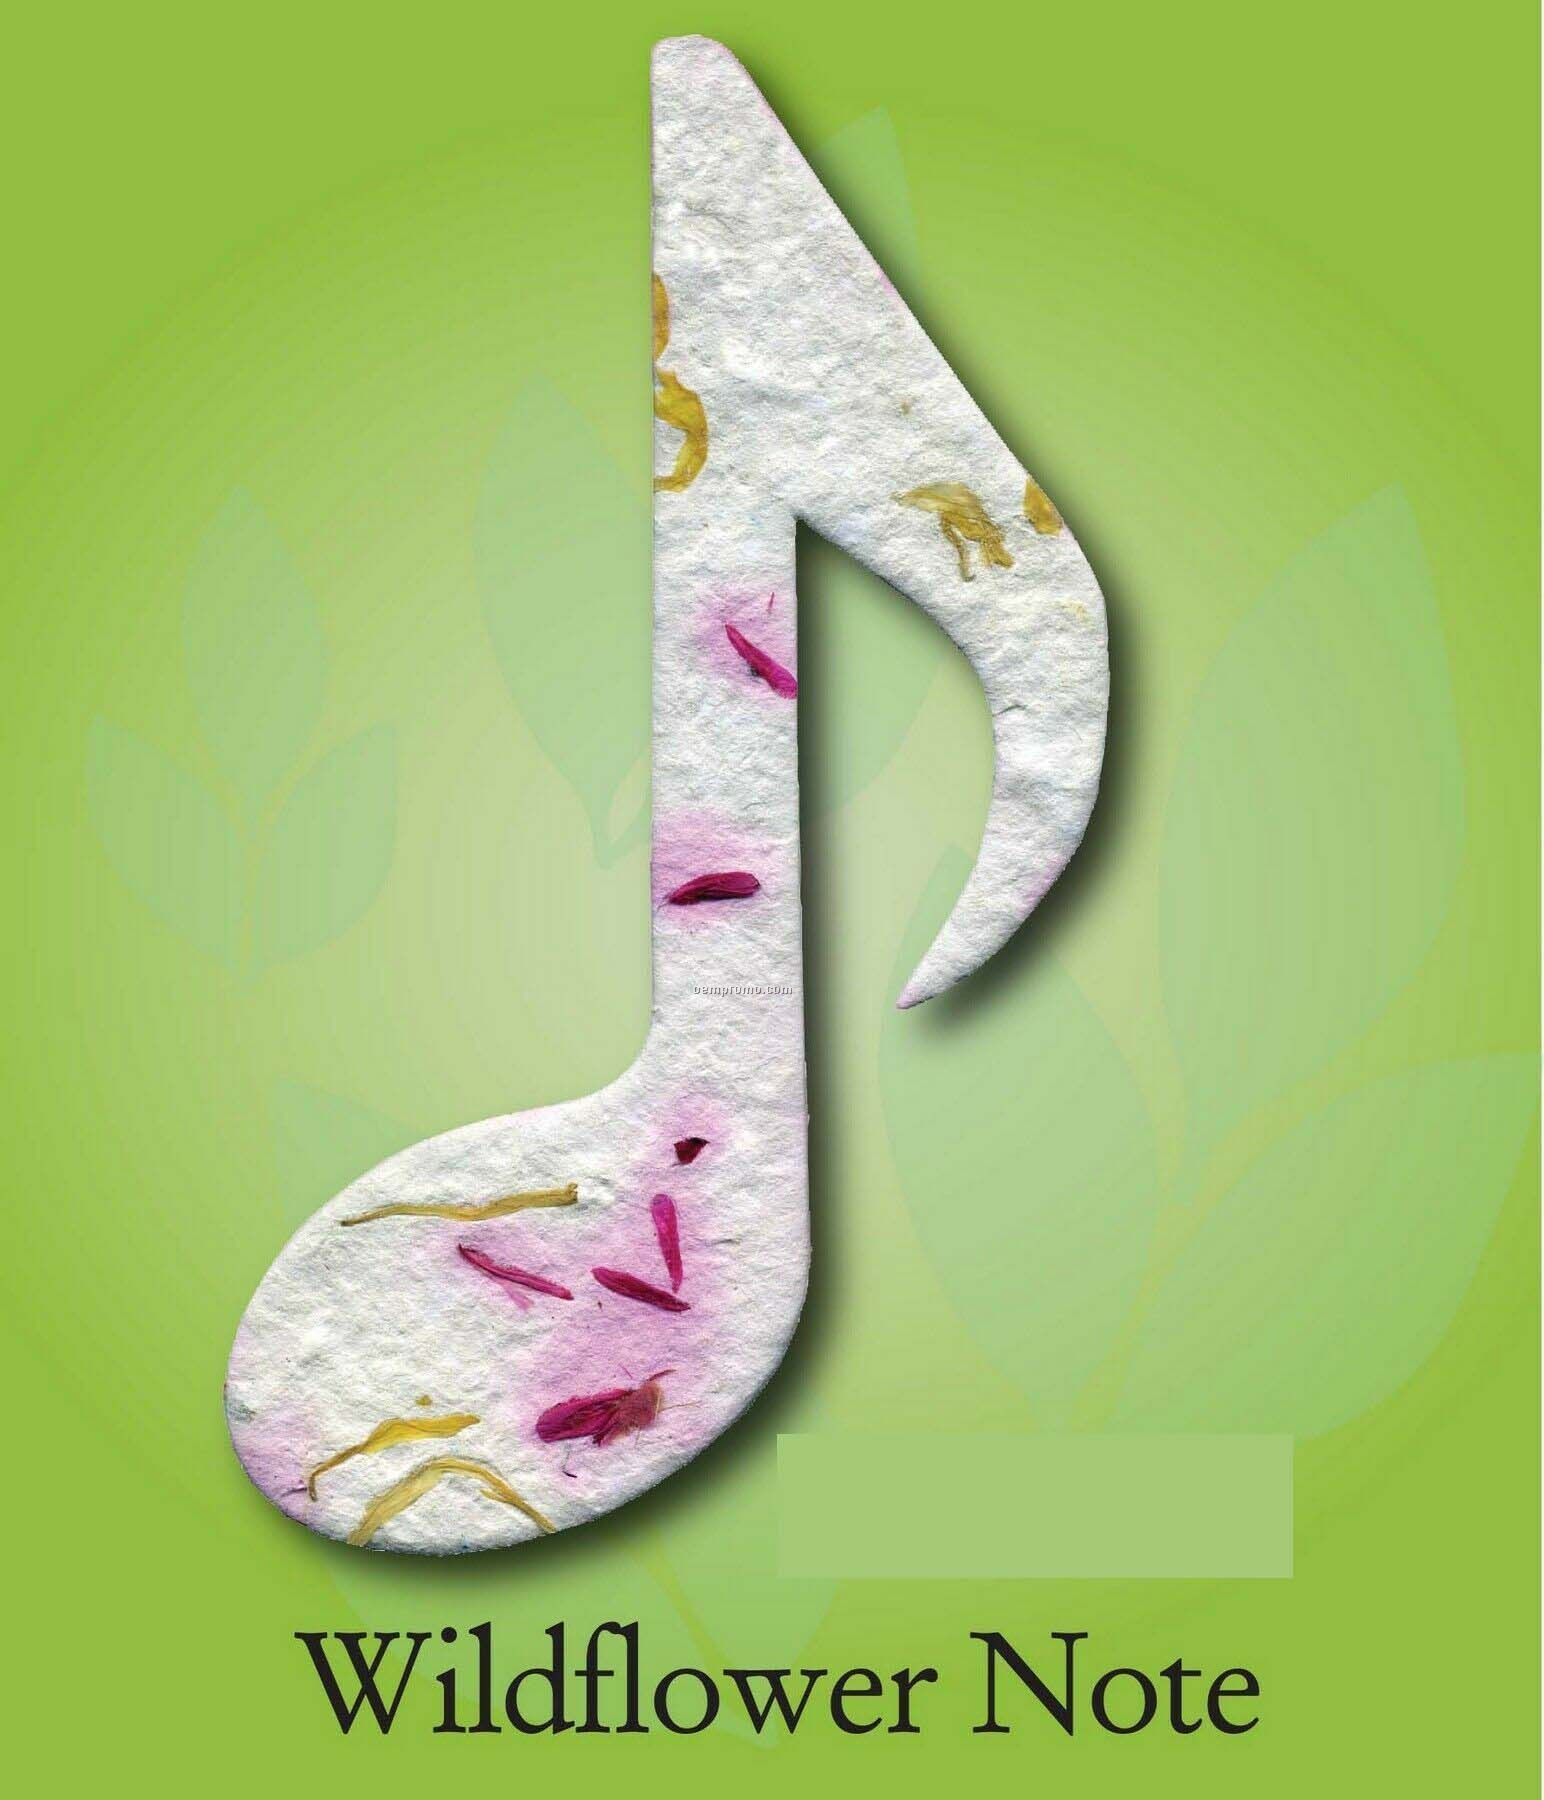 Wildflower Musical Note Ornament With Embedded Seed